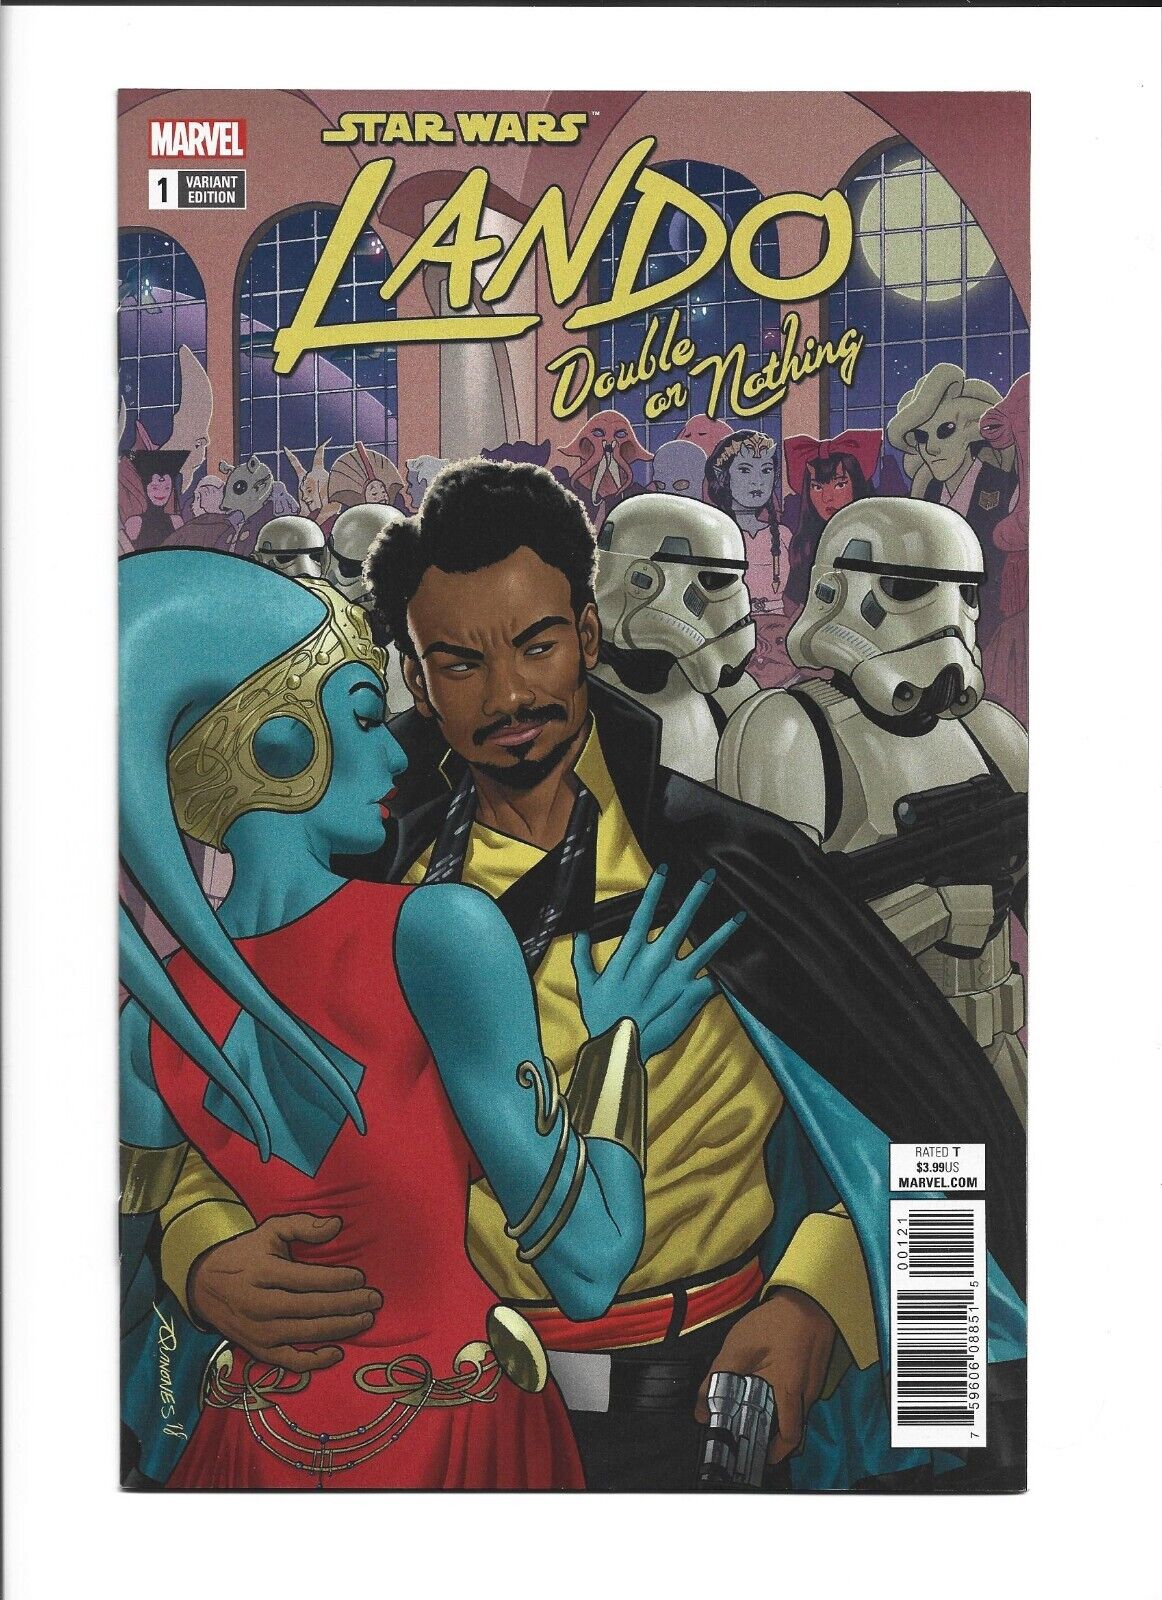 Star Wars Lando Double Or Nothing #1 1:25 Joe Quinones Variant NM Hard to Find